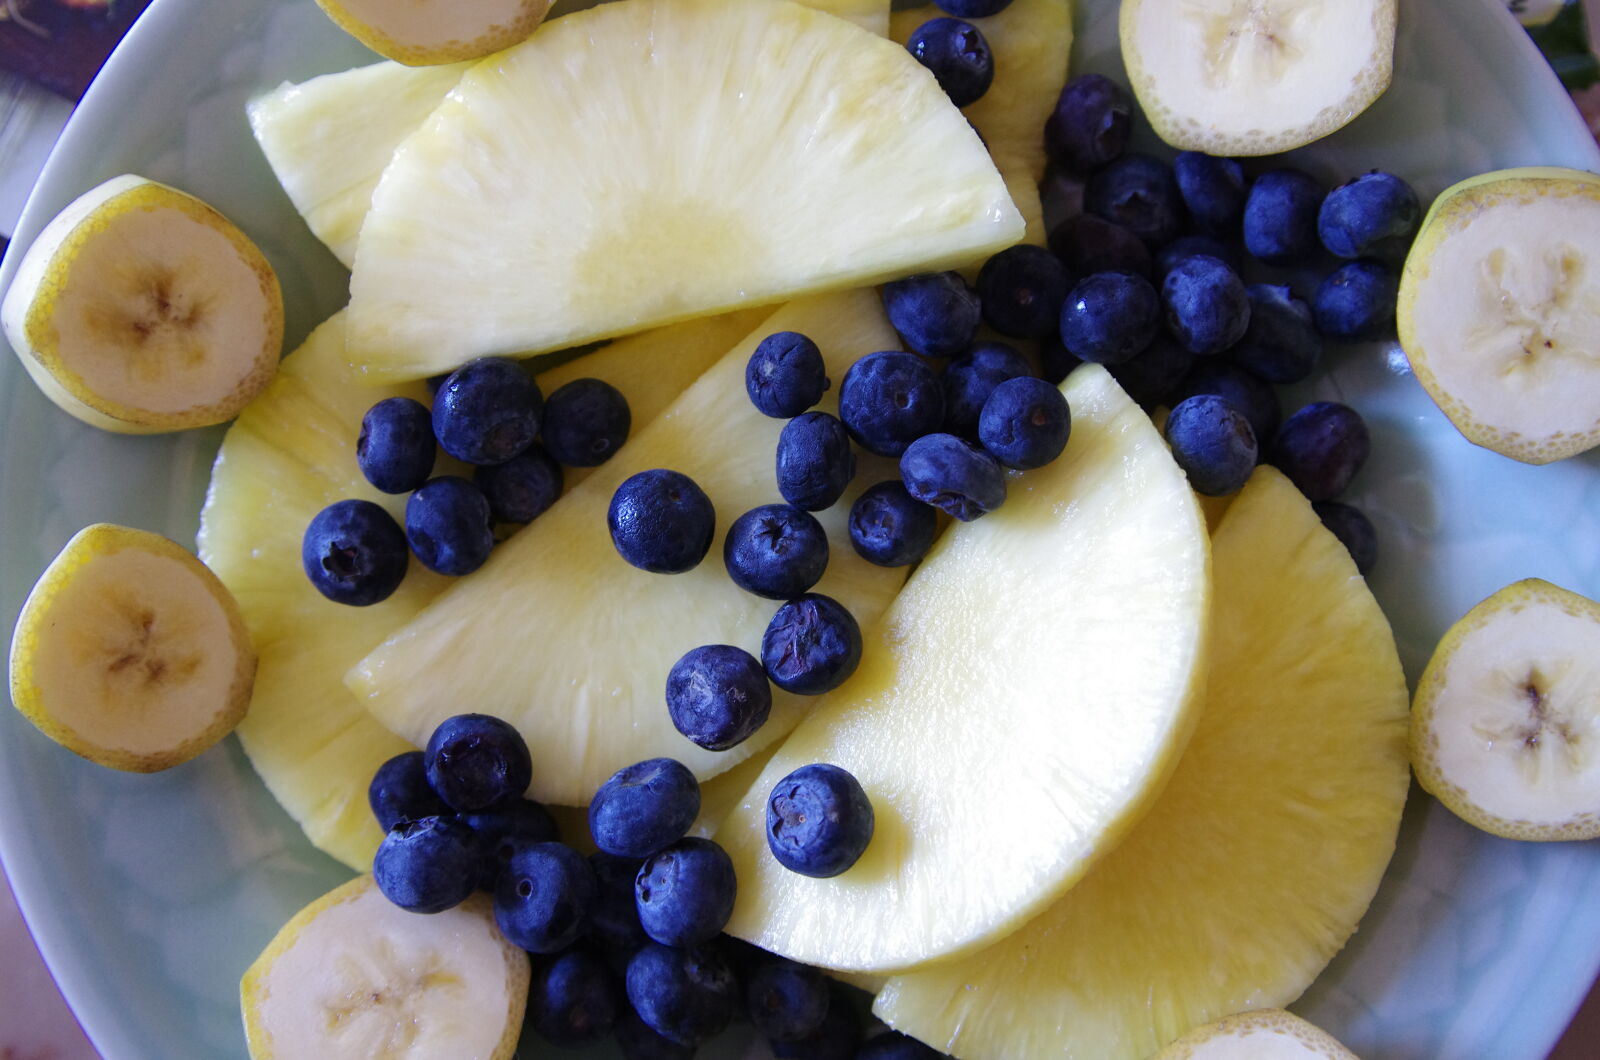 Pentax K-5 + Tamron AF 28-75mm F2.8 XR Di LD Aspherical (IF) sample photo. Bananas, blueberries, food, photography photography